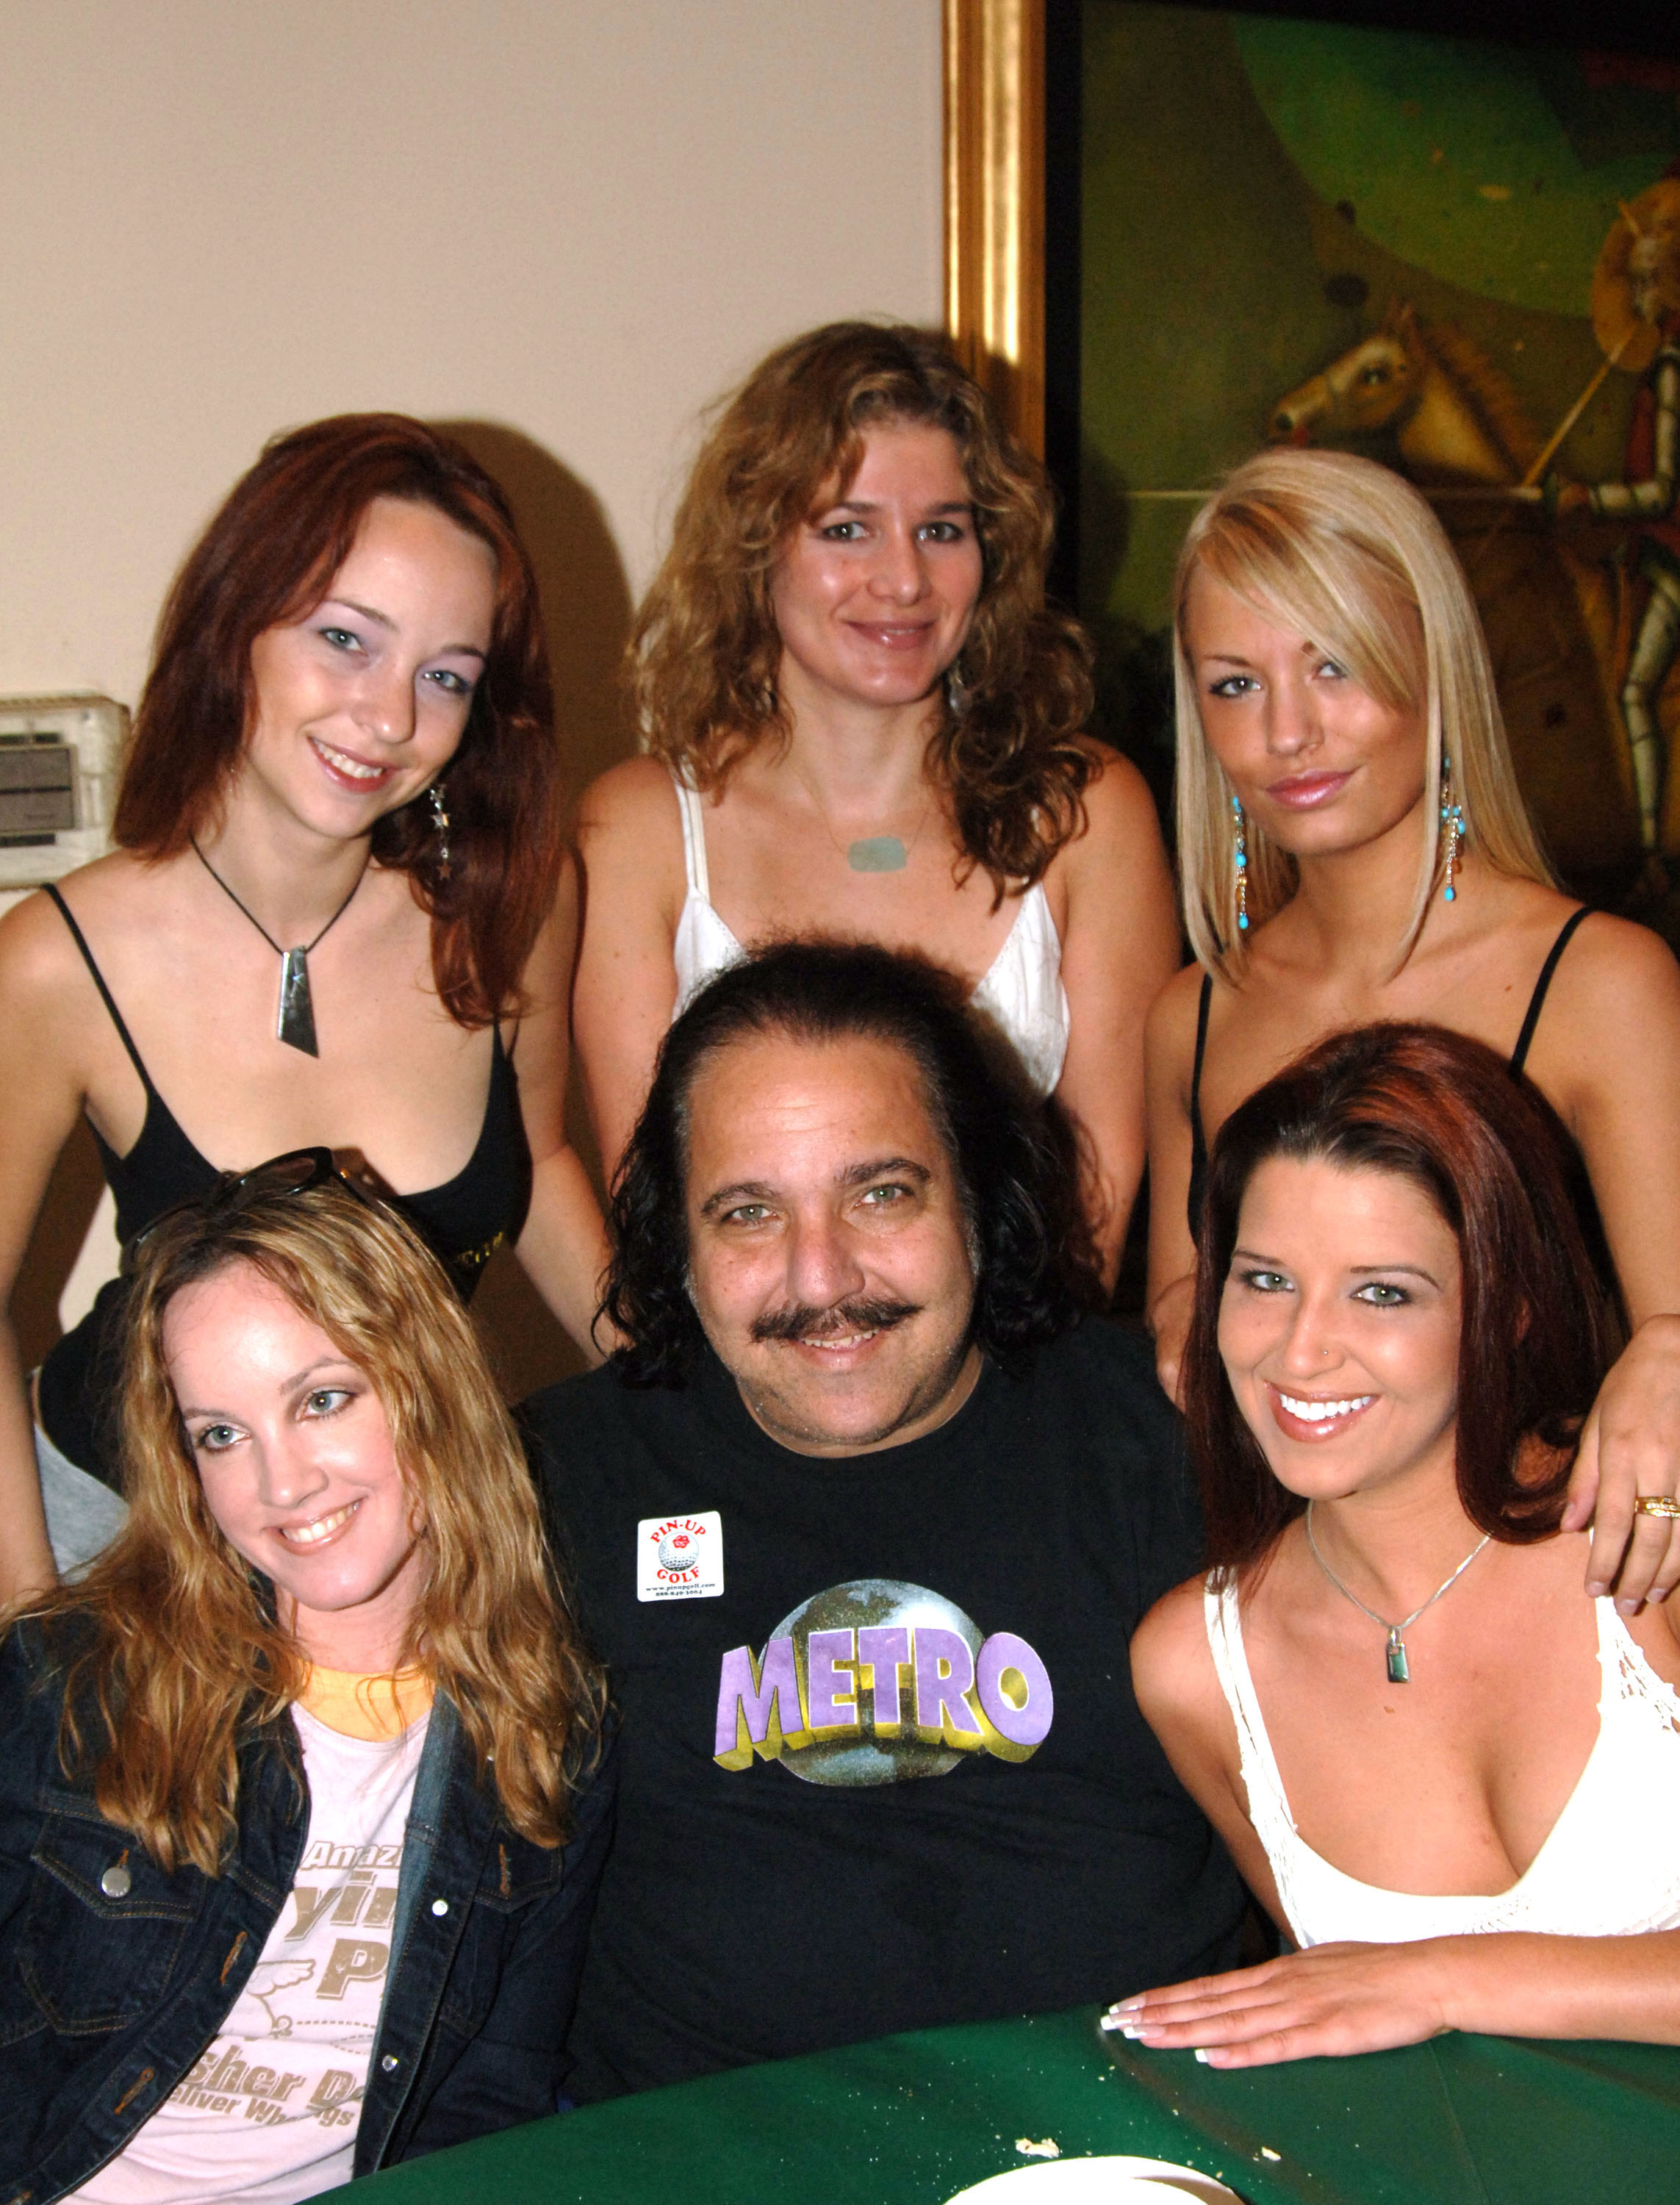 choua khang recommends ron jeremy when young pic